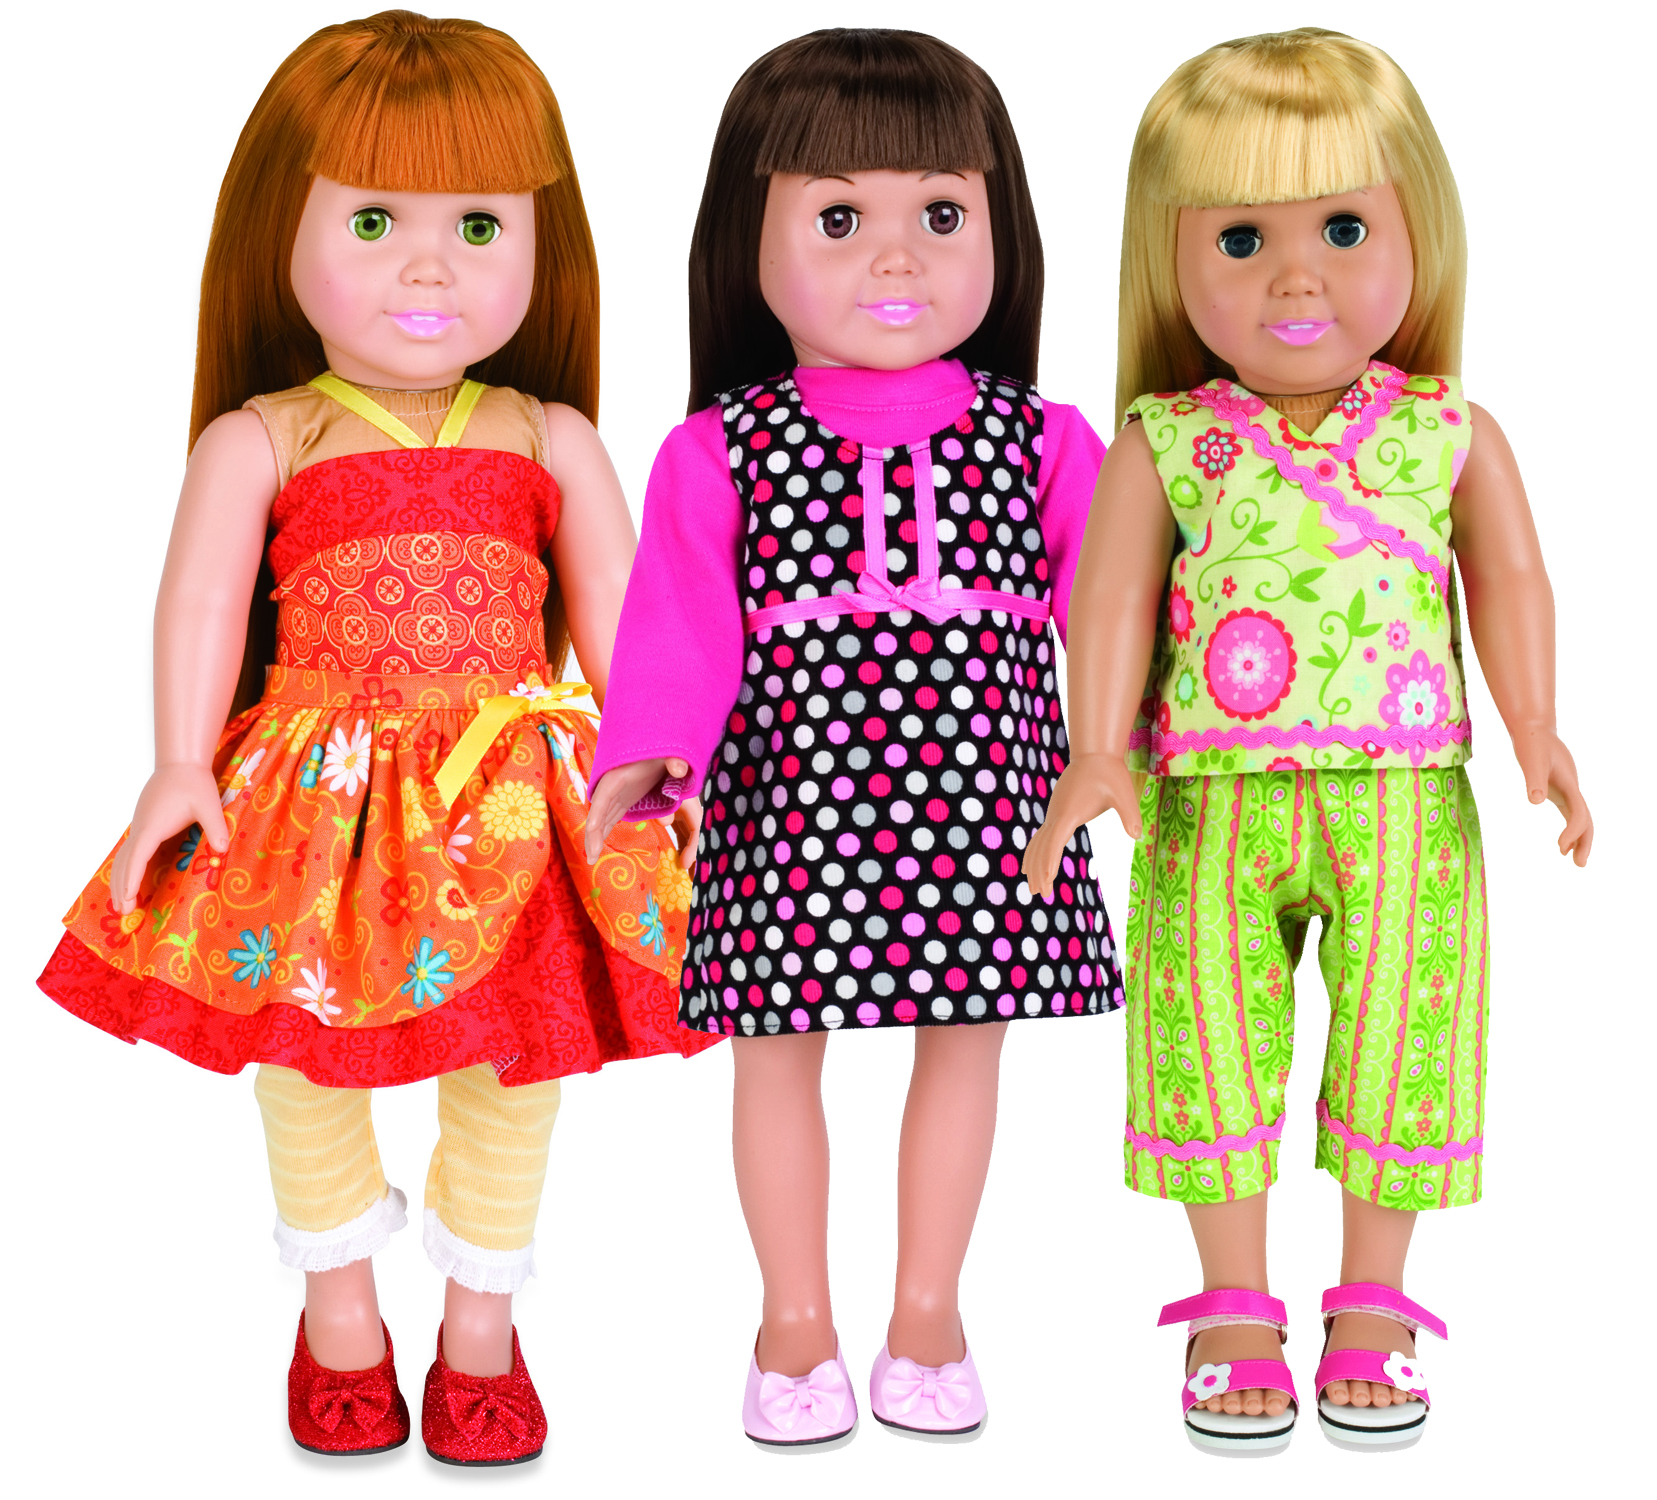 8 Best Images of Pajamas Doll Clothes Printable Patterns - Free ...